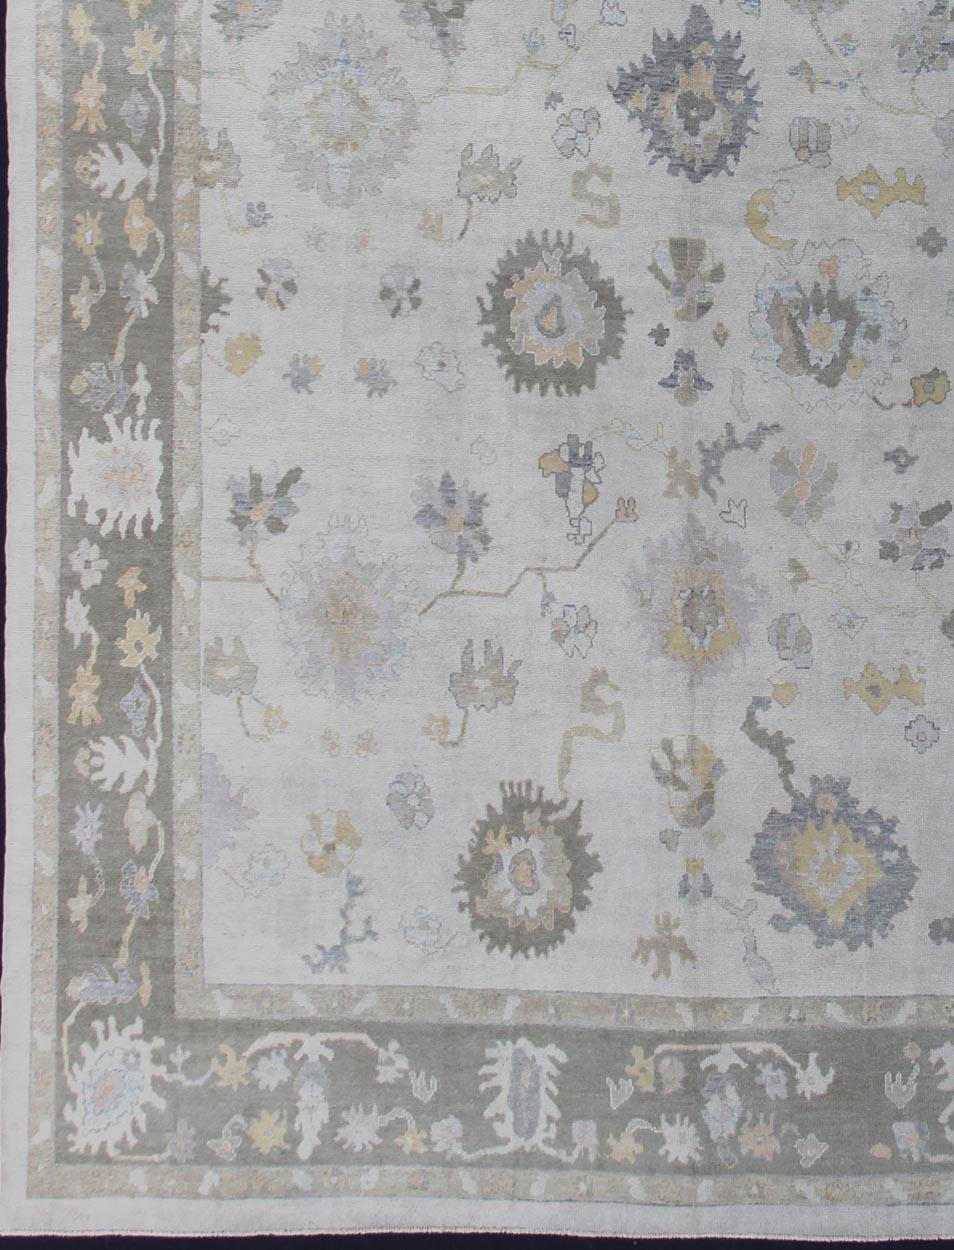 Turkish large Oushak rug with neutral color palette and all-over flower design, rug en-176598, country of origin / type: Turkey / Oushak

This large classic Oushak rug from Turkey features a subdued, neutral color palette and an all-over design of